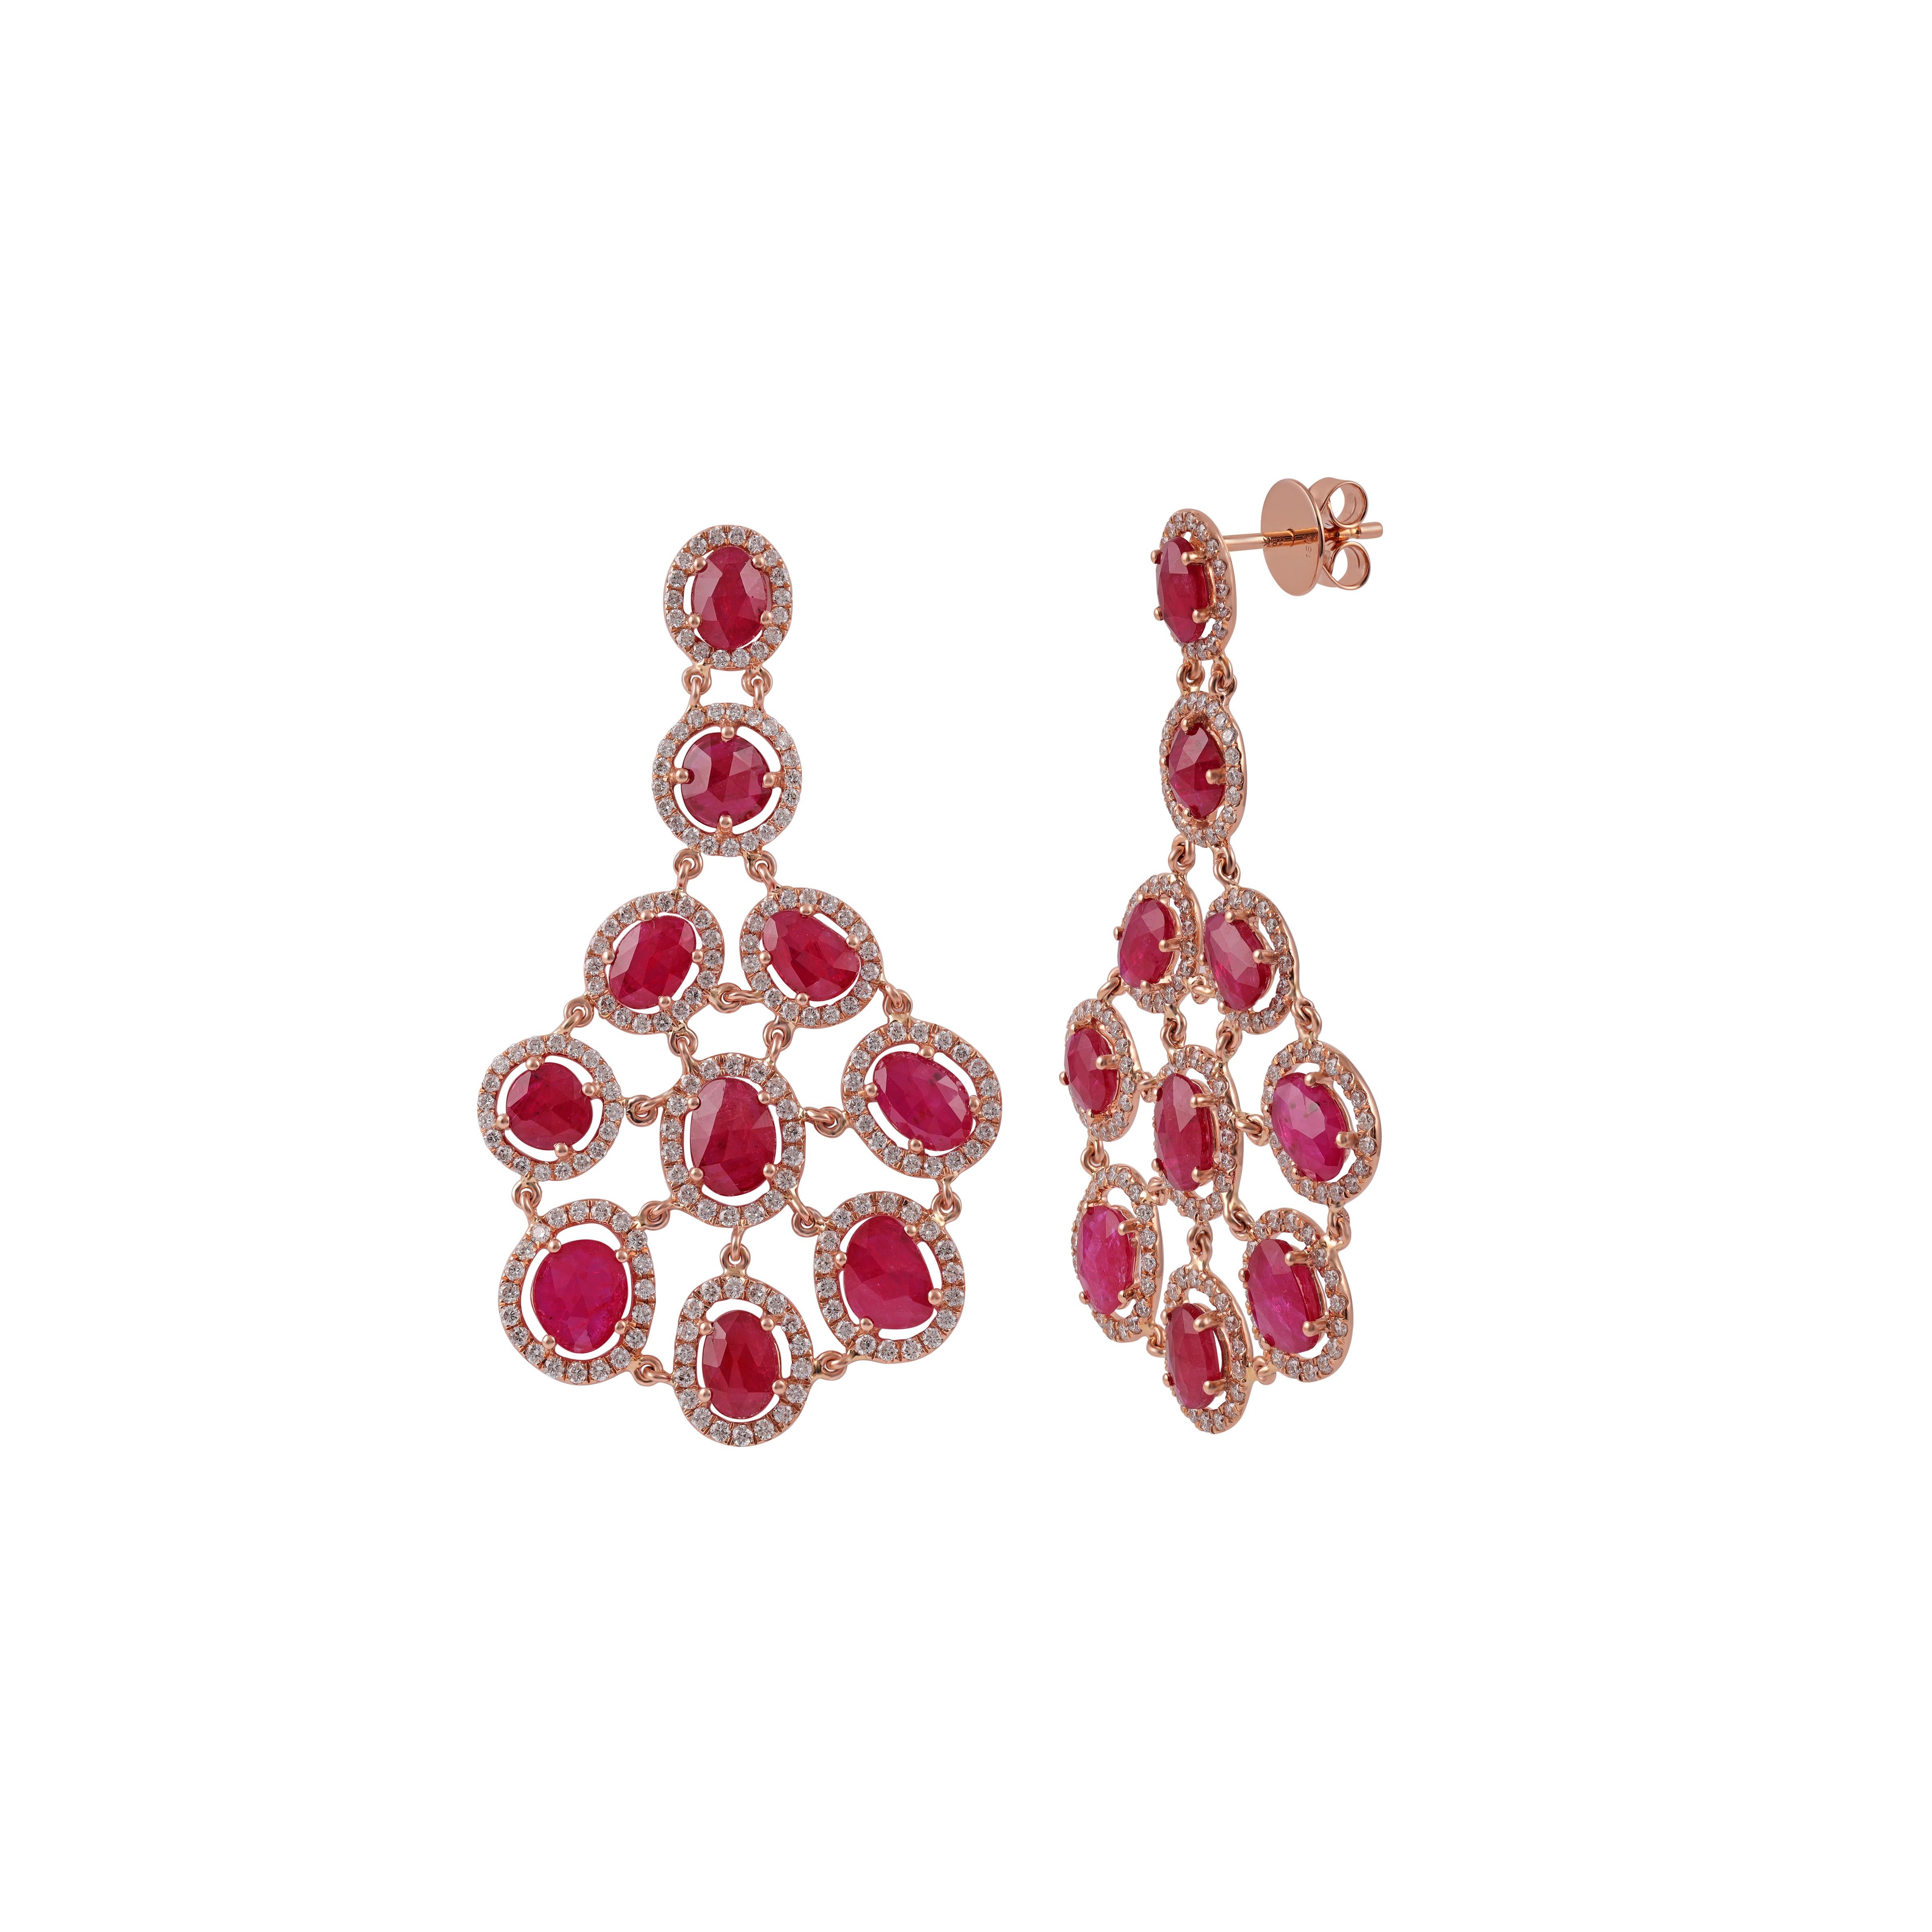 10.03 Carat Mozambique Ruby & Diamonds Long Earrings in 18k Gold In New Condition For Sale In Jaipur, Rajasthan